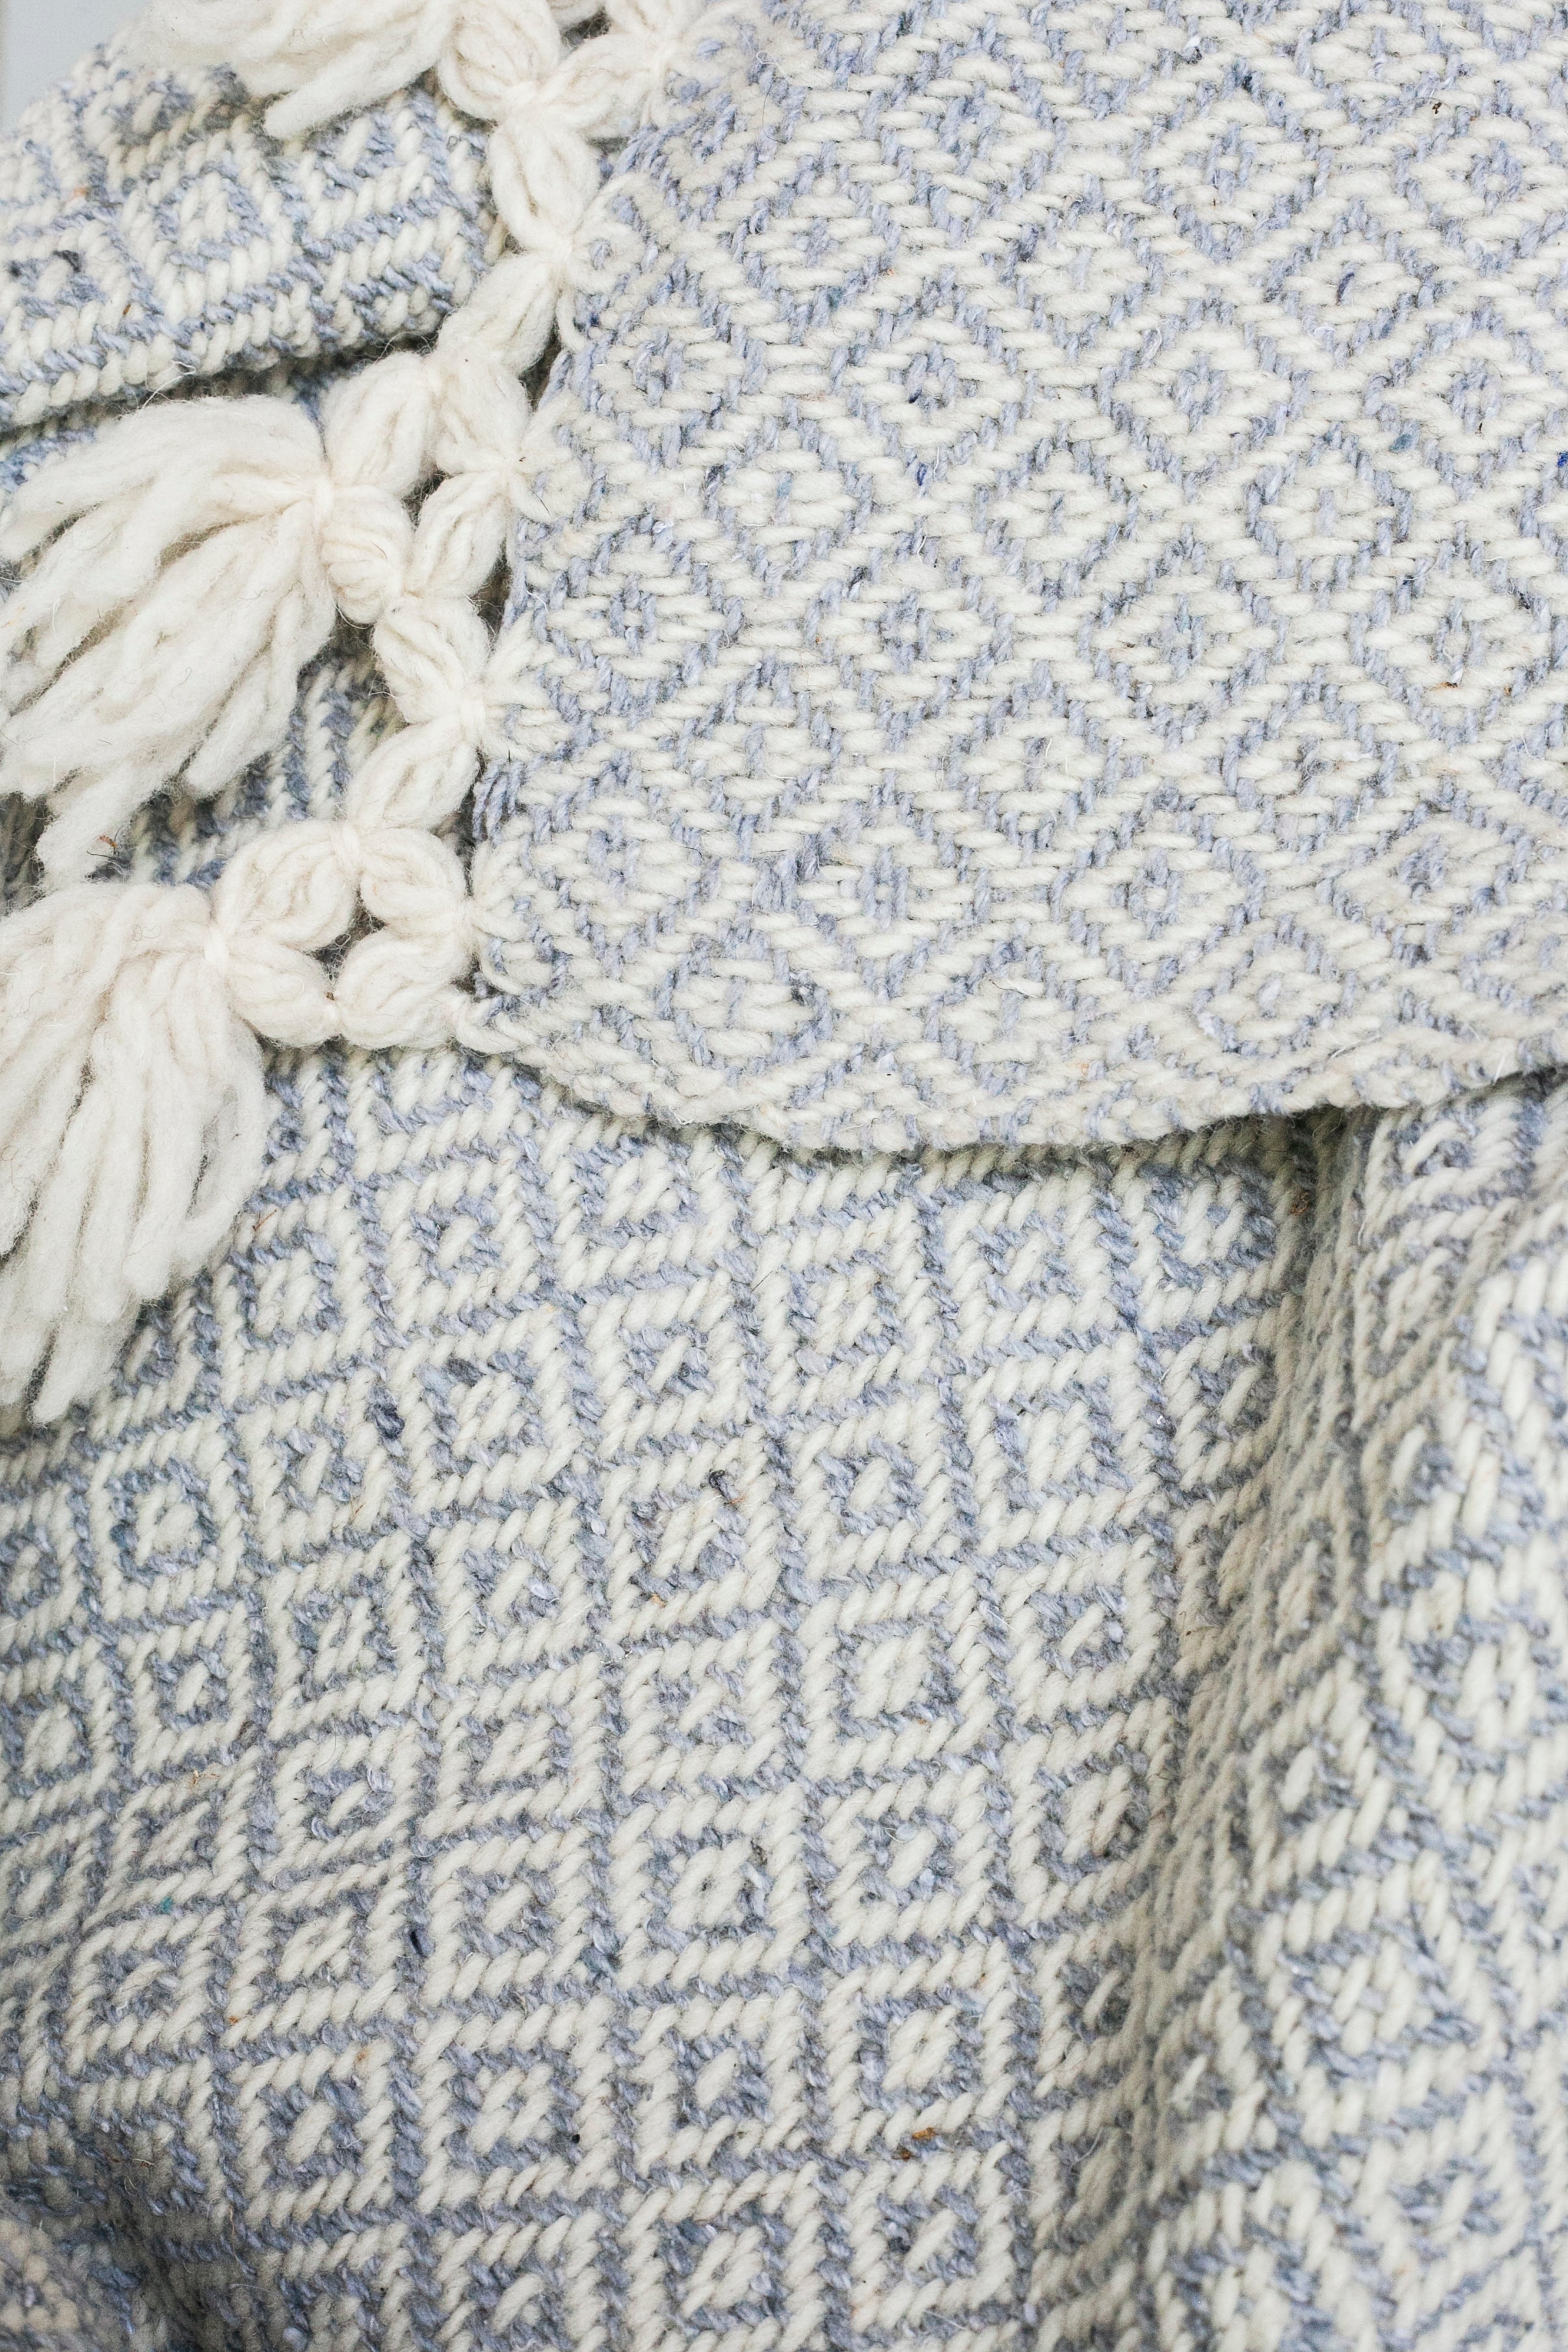 Detail of light grey and white diamond weaving and tied tassels from a wool throw blanket